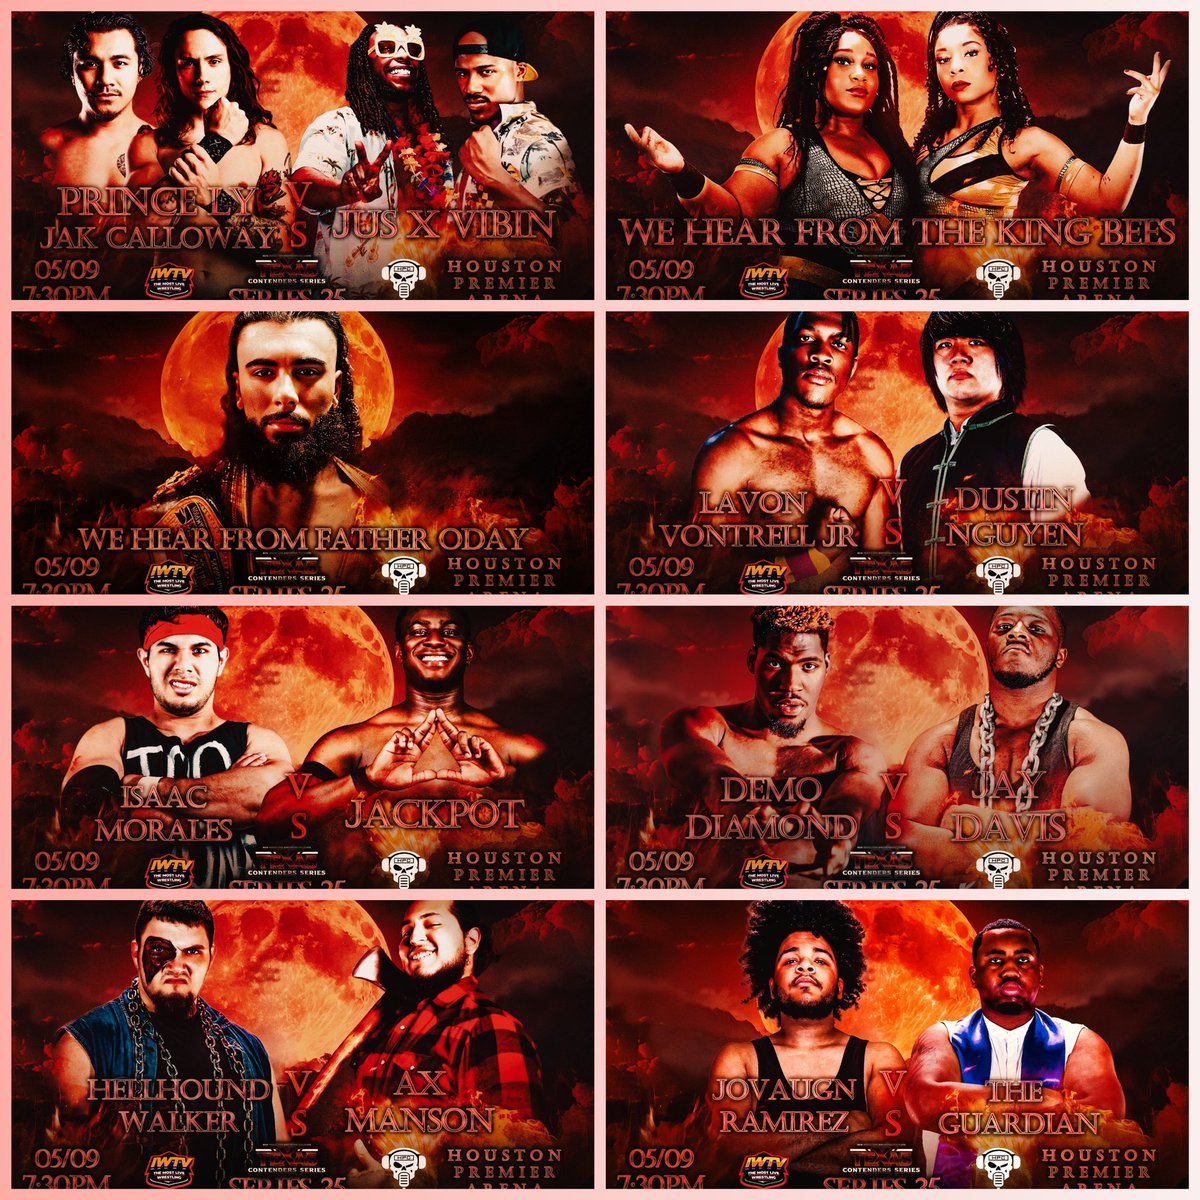 ❗️TOMORROW❗️ We return to the Houston Premier Arena for a STACKED Texas Contenders Series!! #TCS35 • 5/9 • 7:30PM Houston Premier Arena 📺: @indiewrestling Presented by @HPCBadGuys Graphic: @berock0 Tickets start at just $5! 🎟️: NewTexasPro.Com/Events